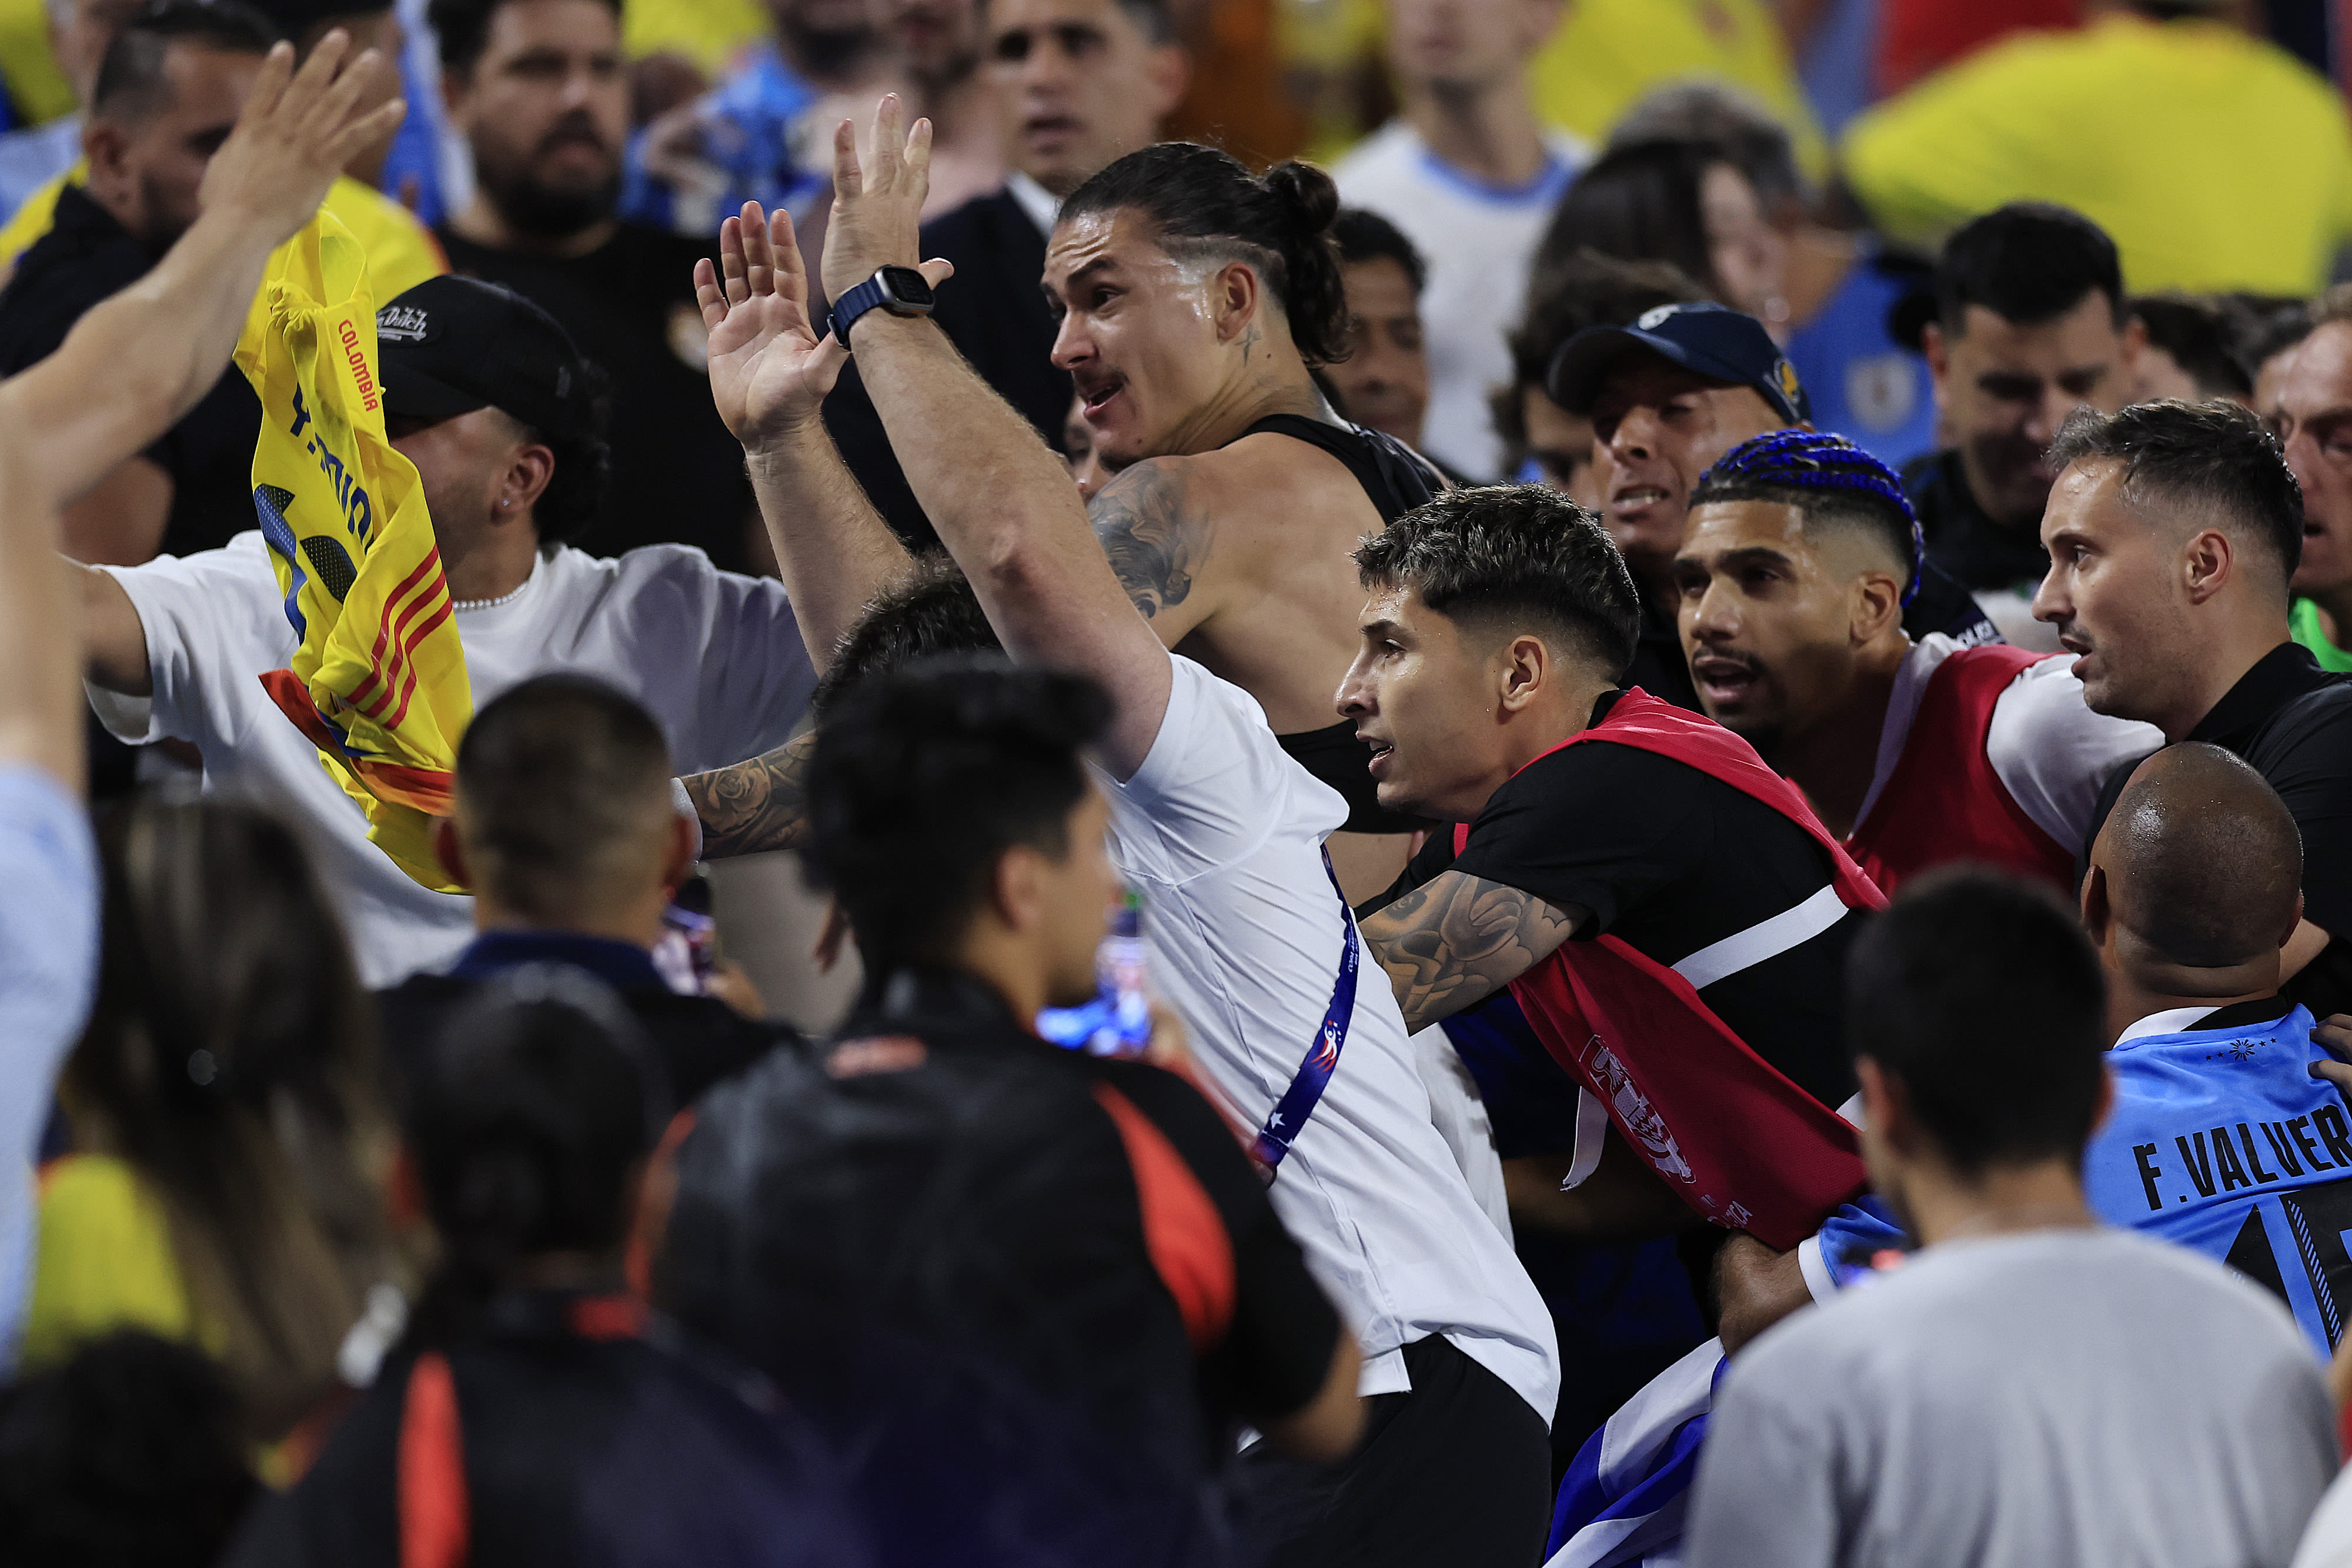 Copa América: Uruguay players, including Darwin Núñez, brawl with fans after loss to Colombia